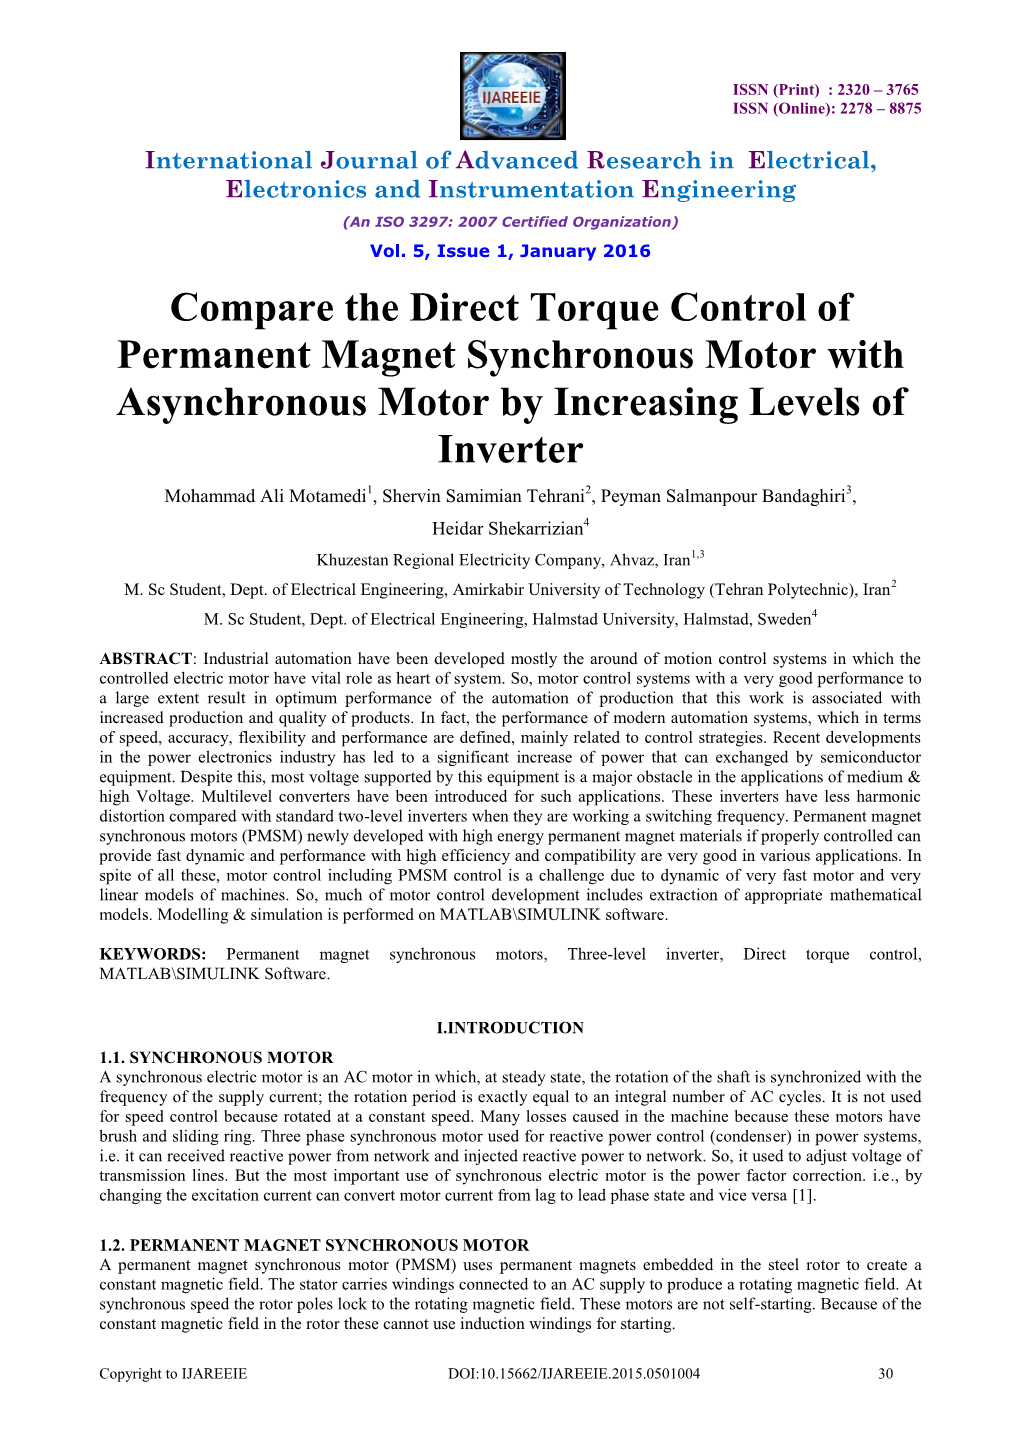 Compare the Direct Torque Control of Permanent Magnet Synchronous